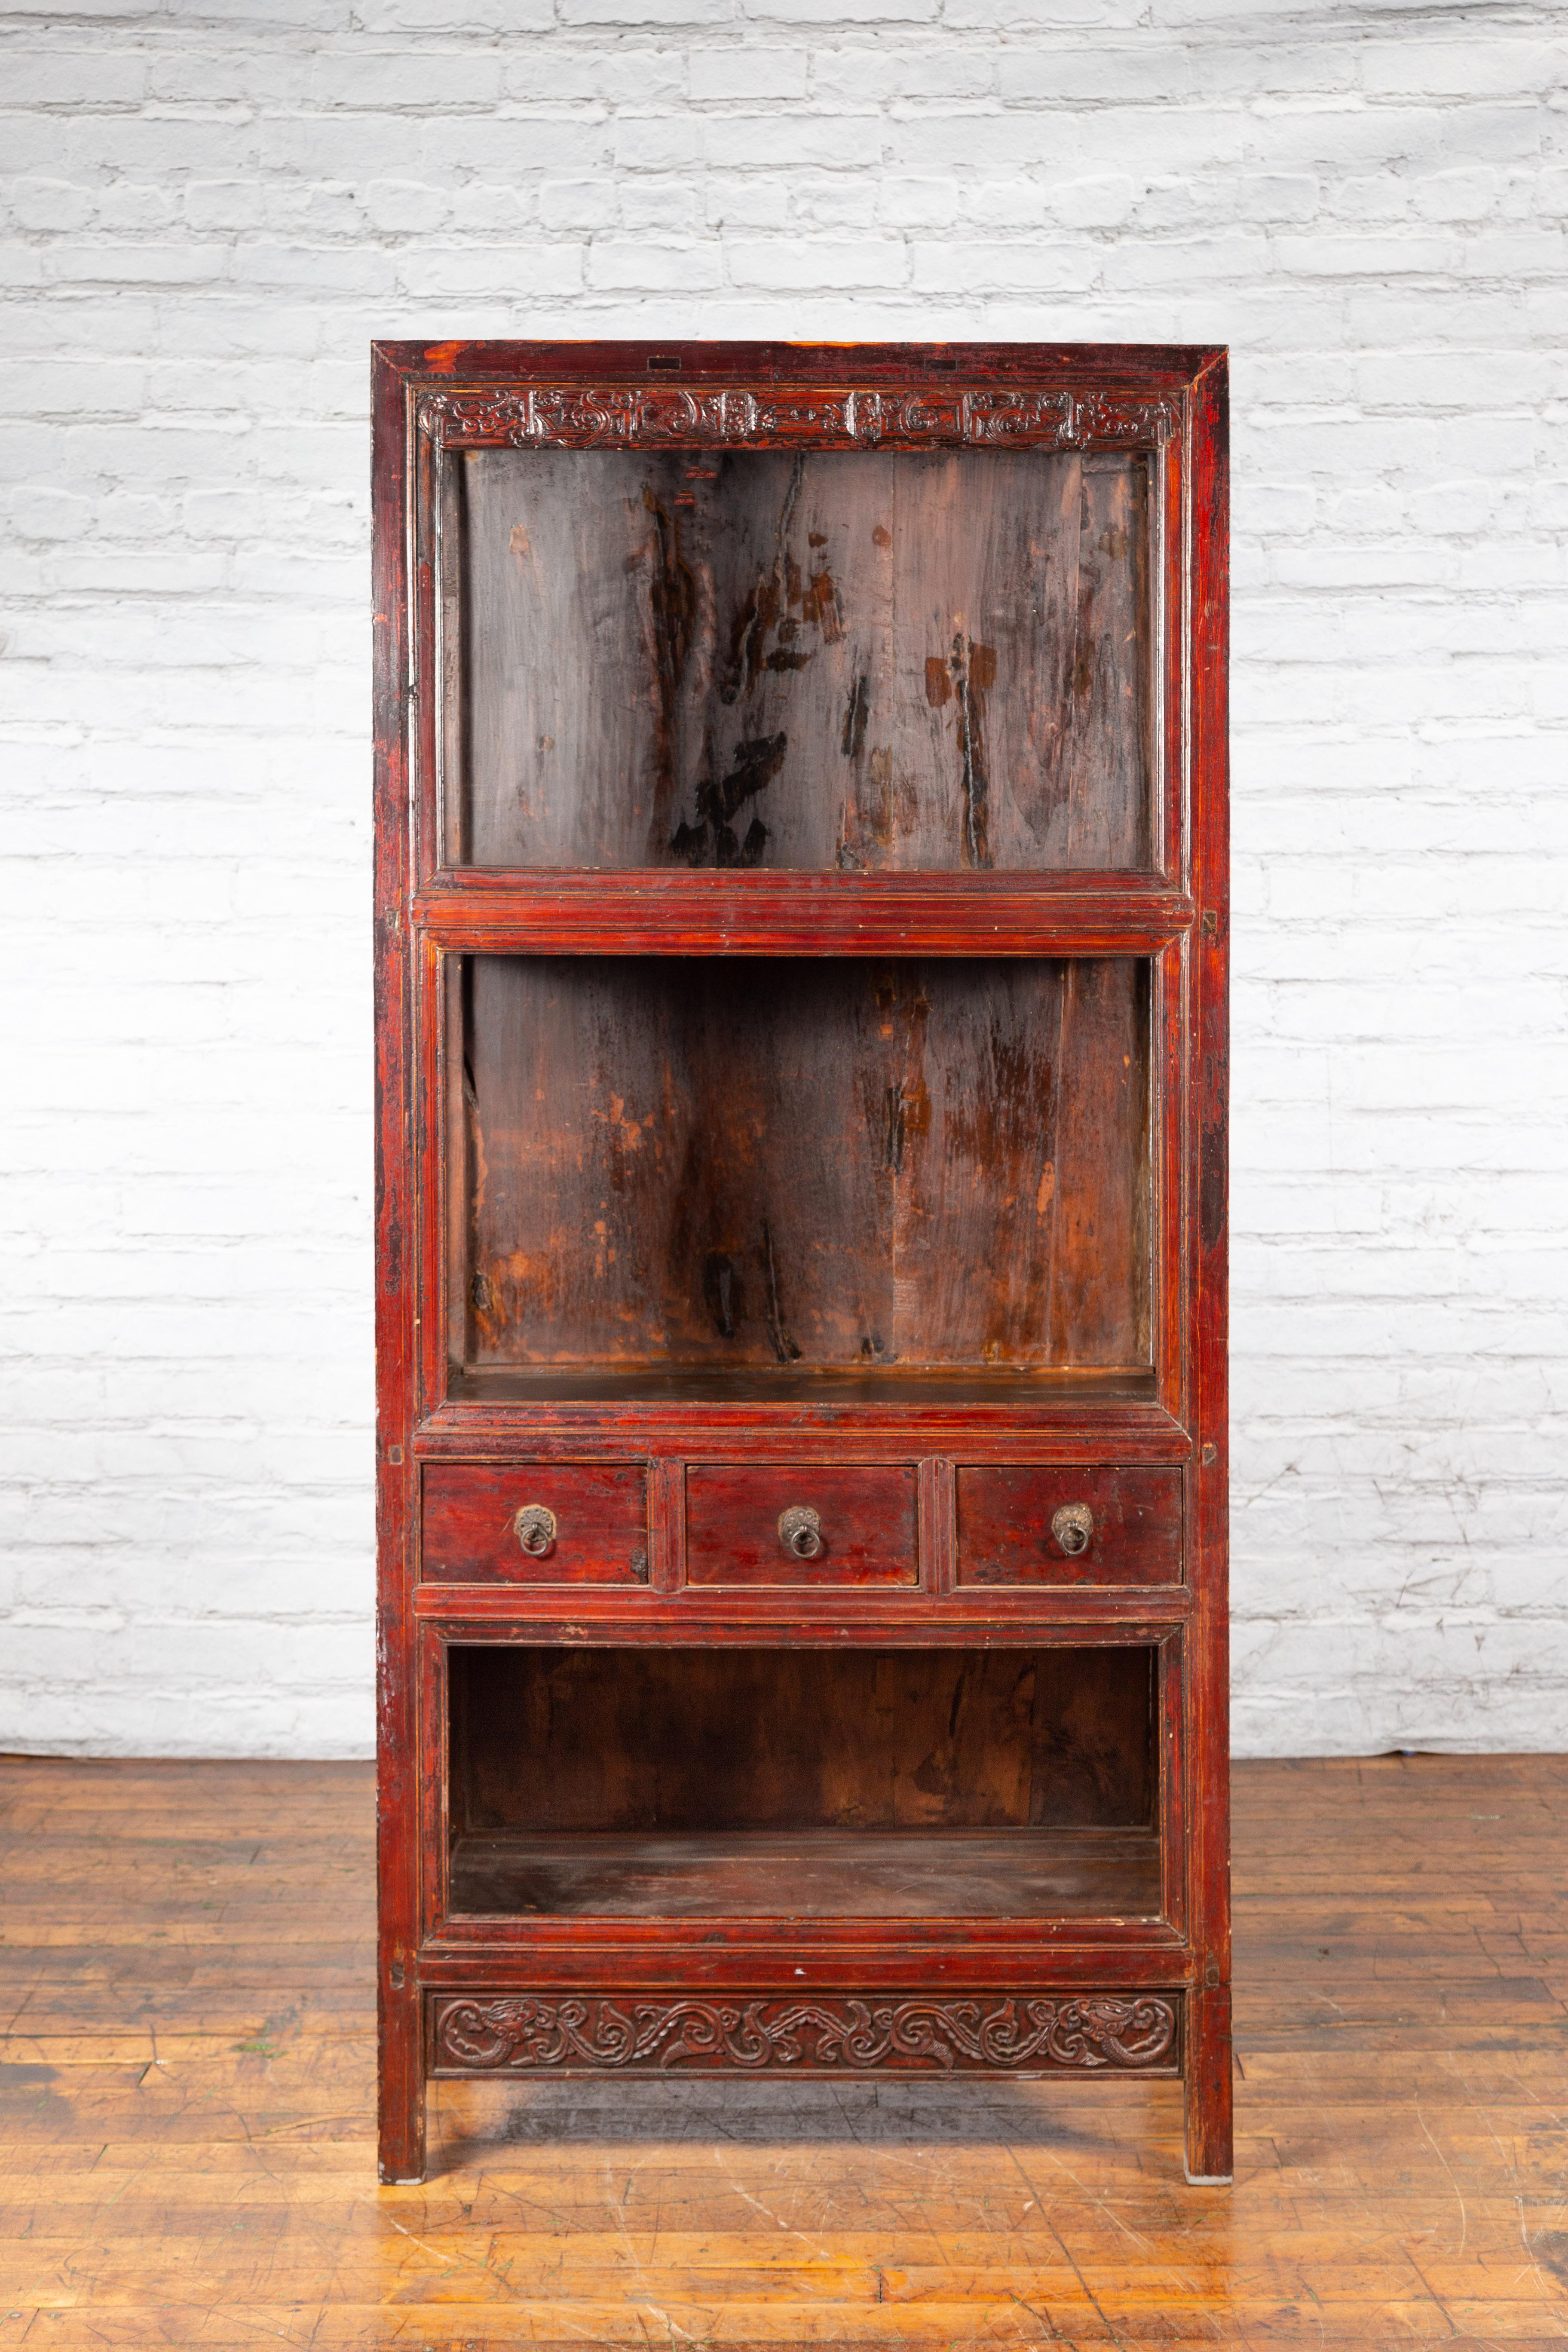 A Chinese Qing Dynasty period wooden display cabinet from the 19th century, with reddish brown lacquer, open shelves, drawers and carved friezes. Created in China during the Qing Dynasty period in the 19th century, this display cabinet features a